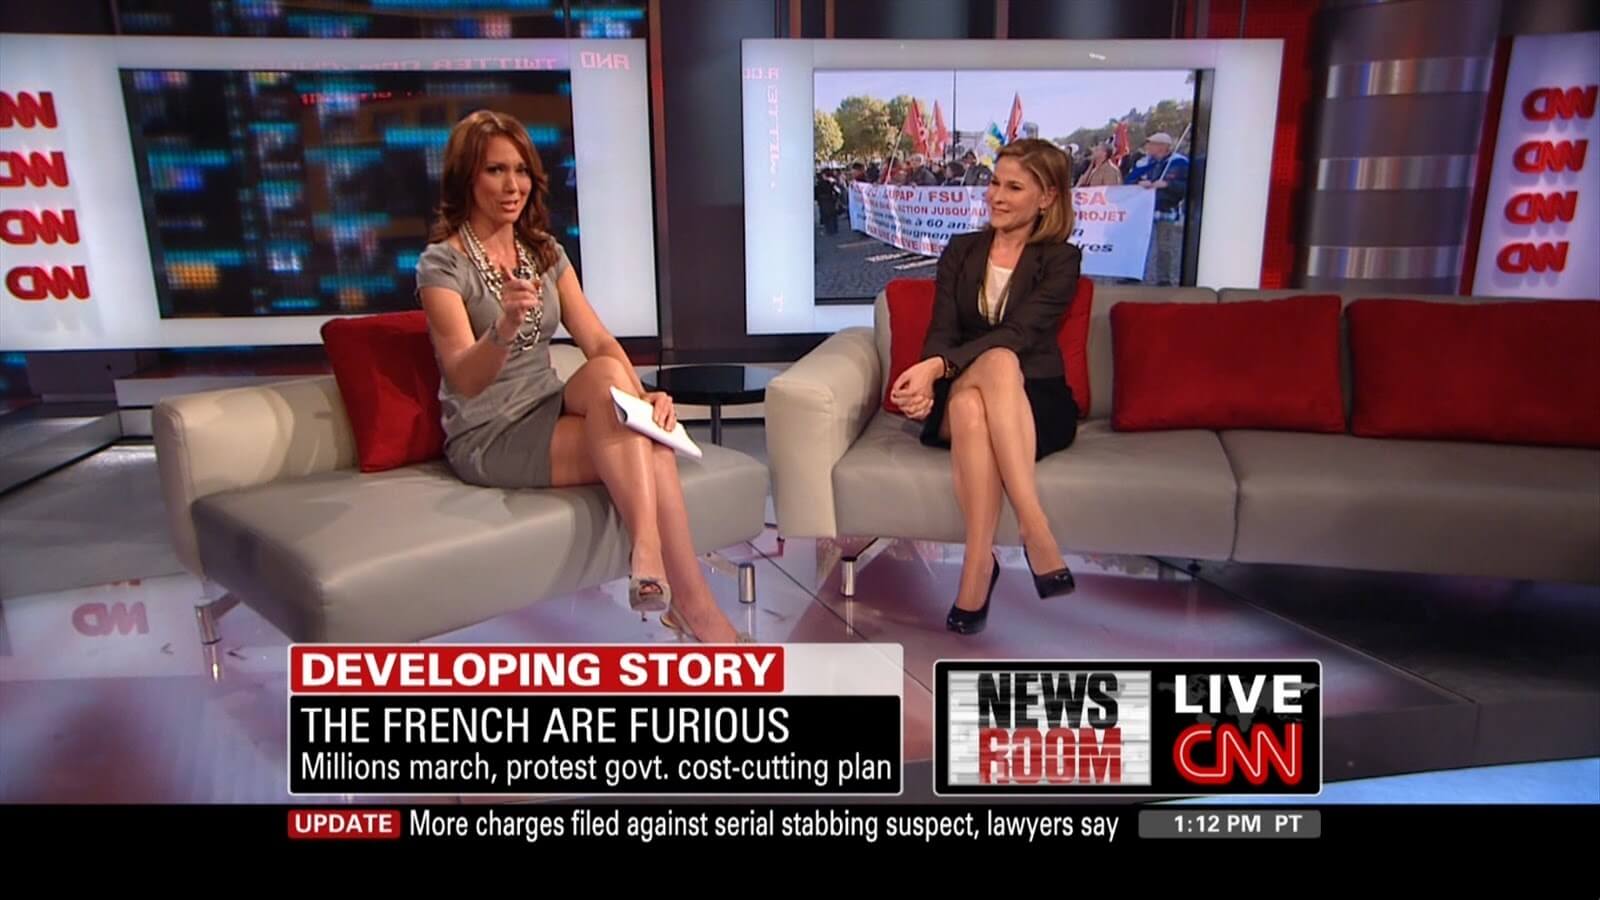 41 Brooke Baldwin Nude Pictures Can Leave You Flabbergasted 7